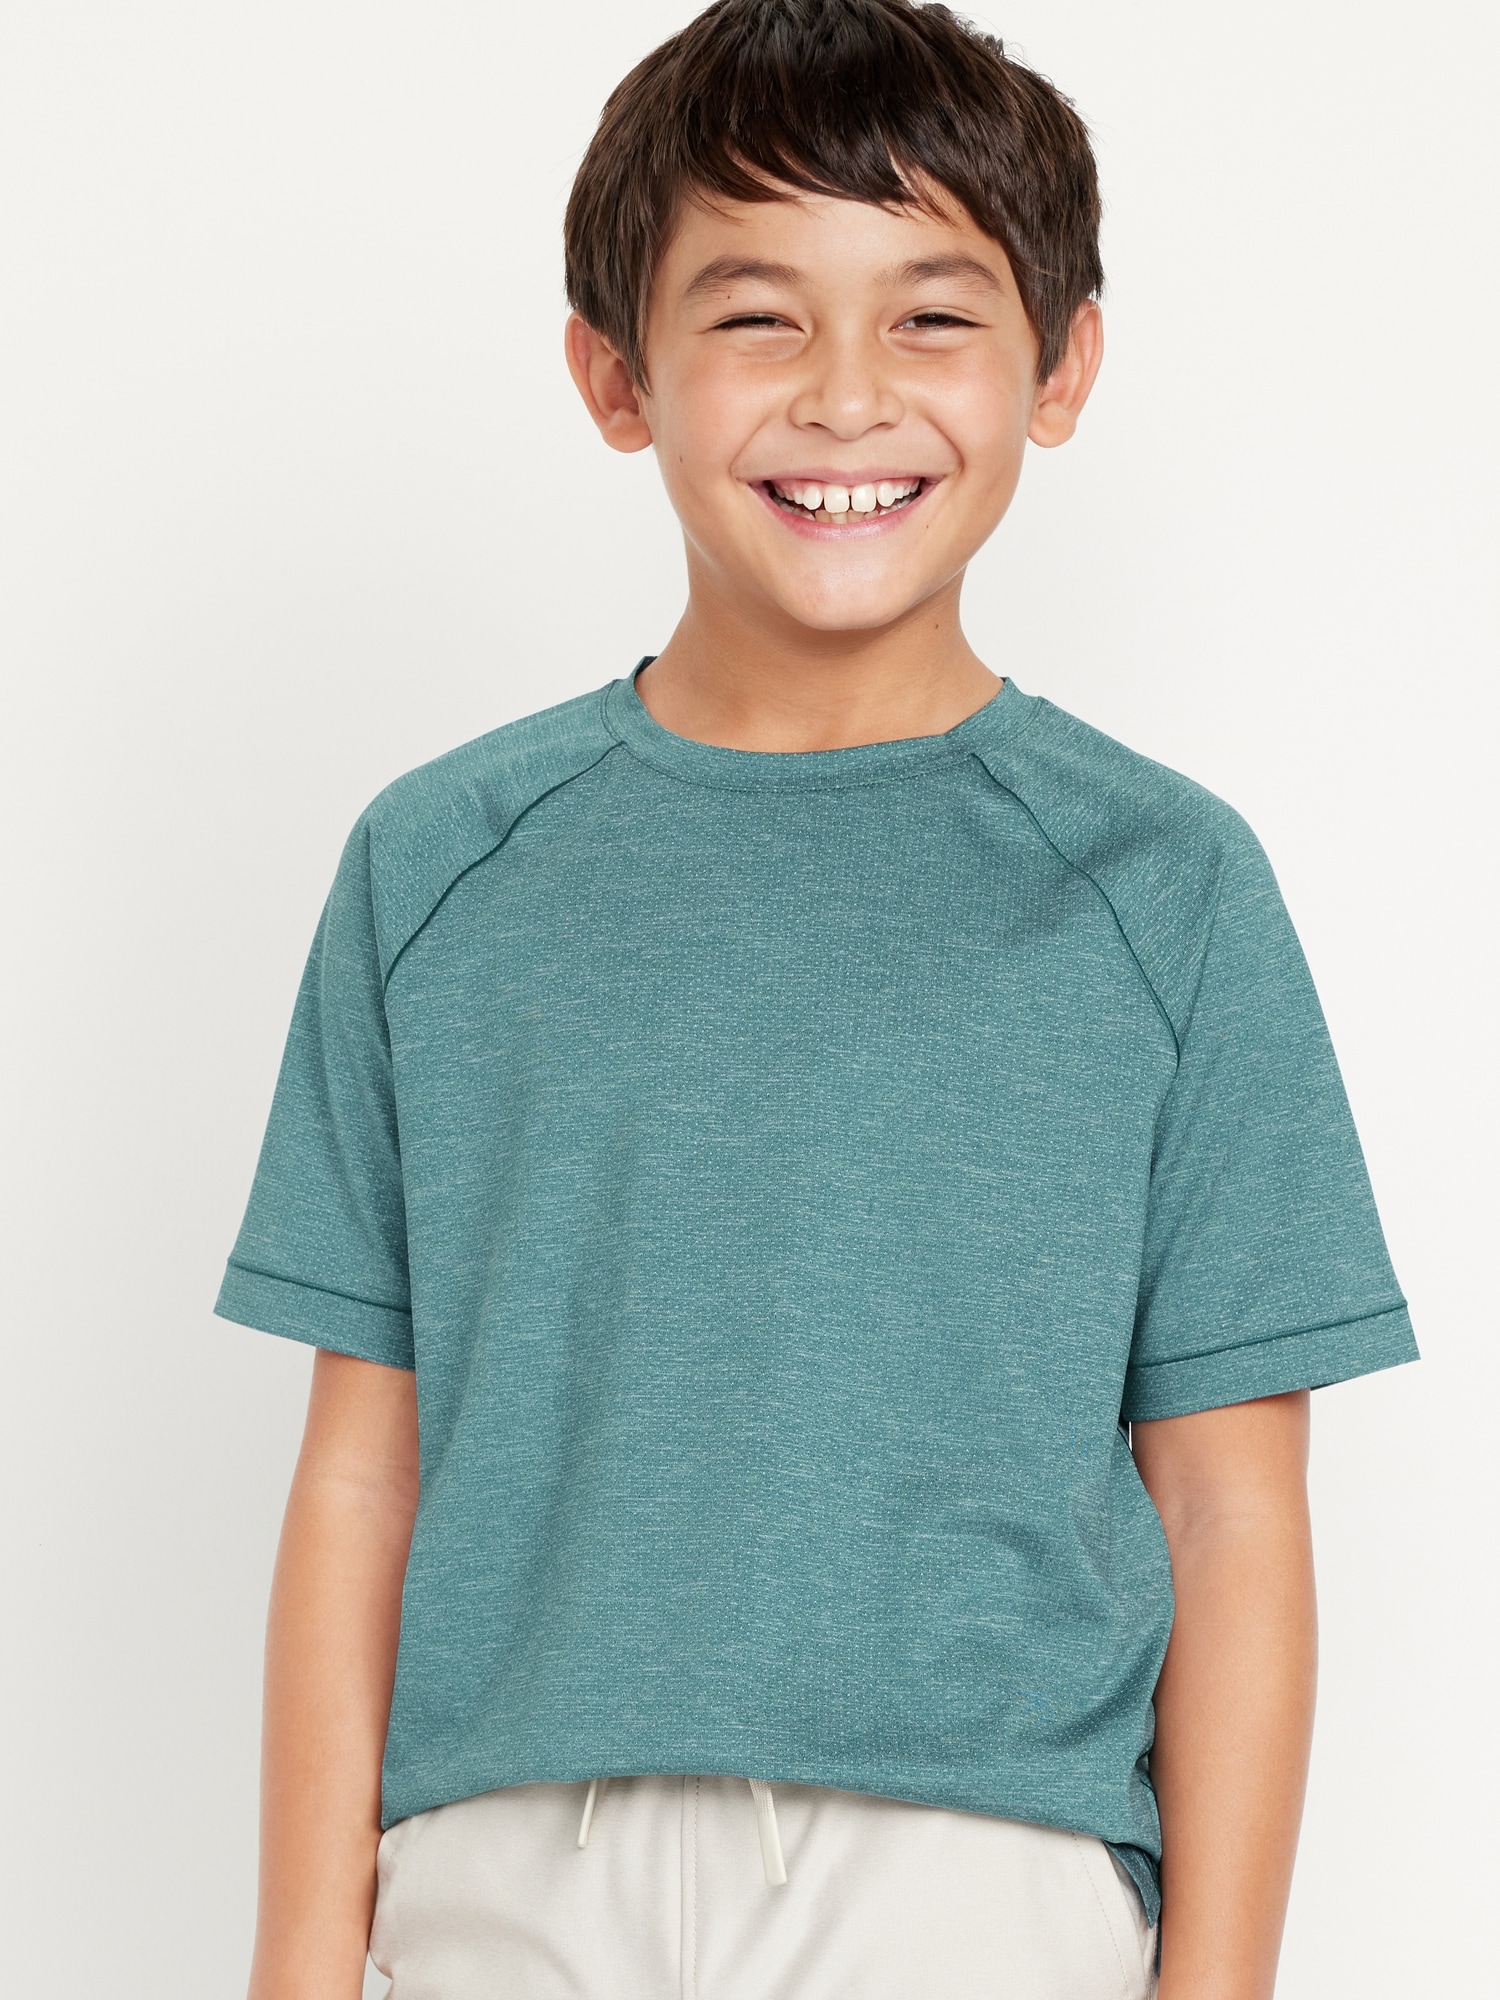 Go-Dry Cool Performance T-Shirt for Boys